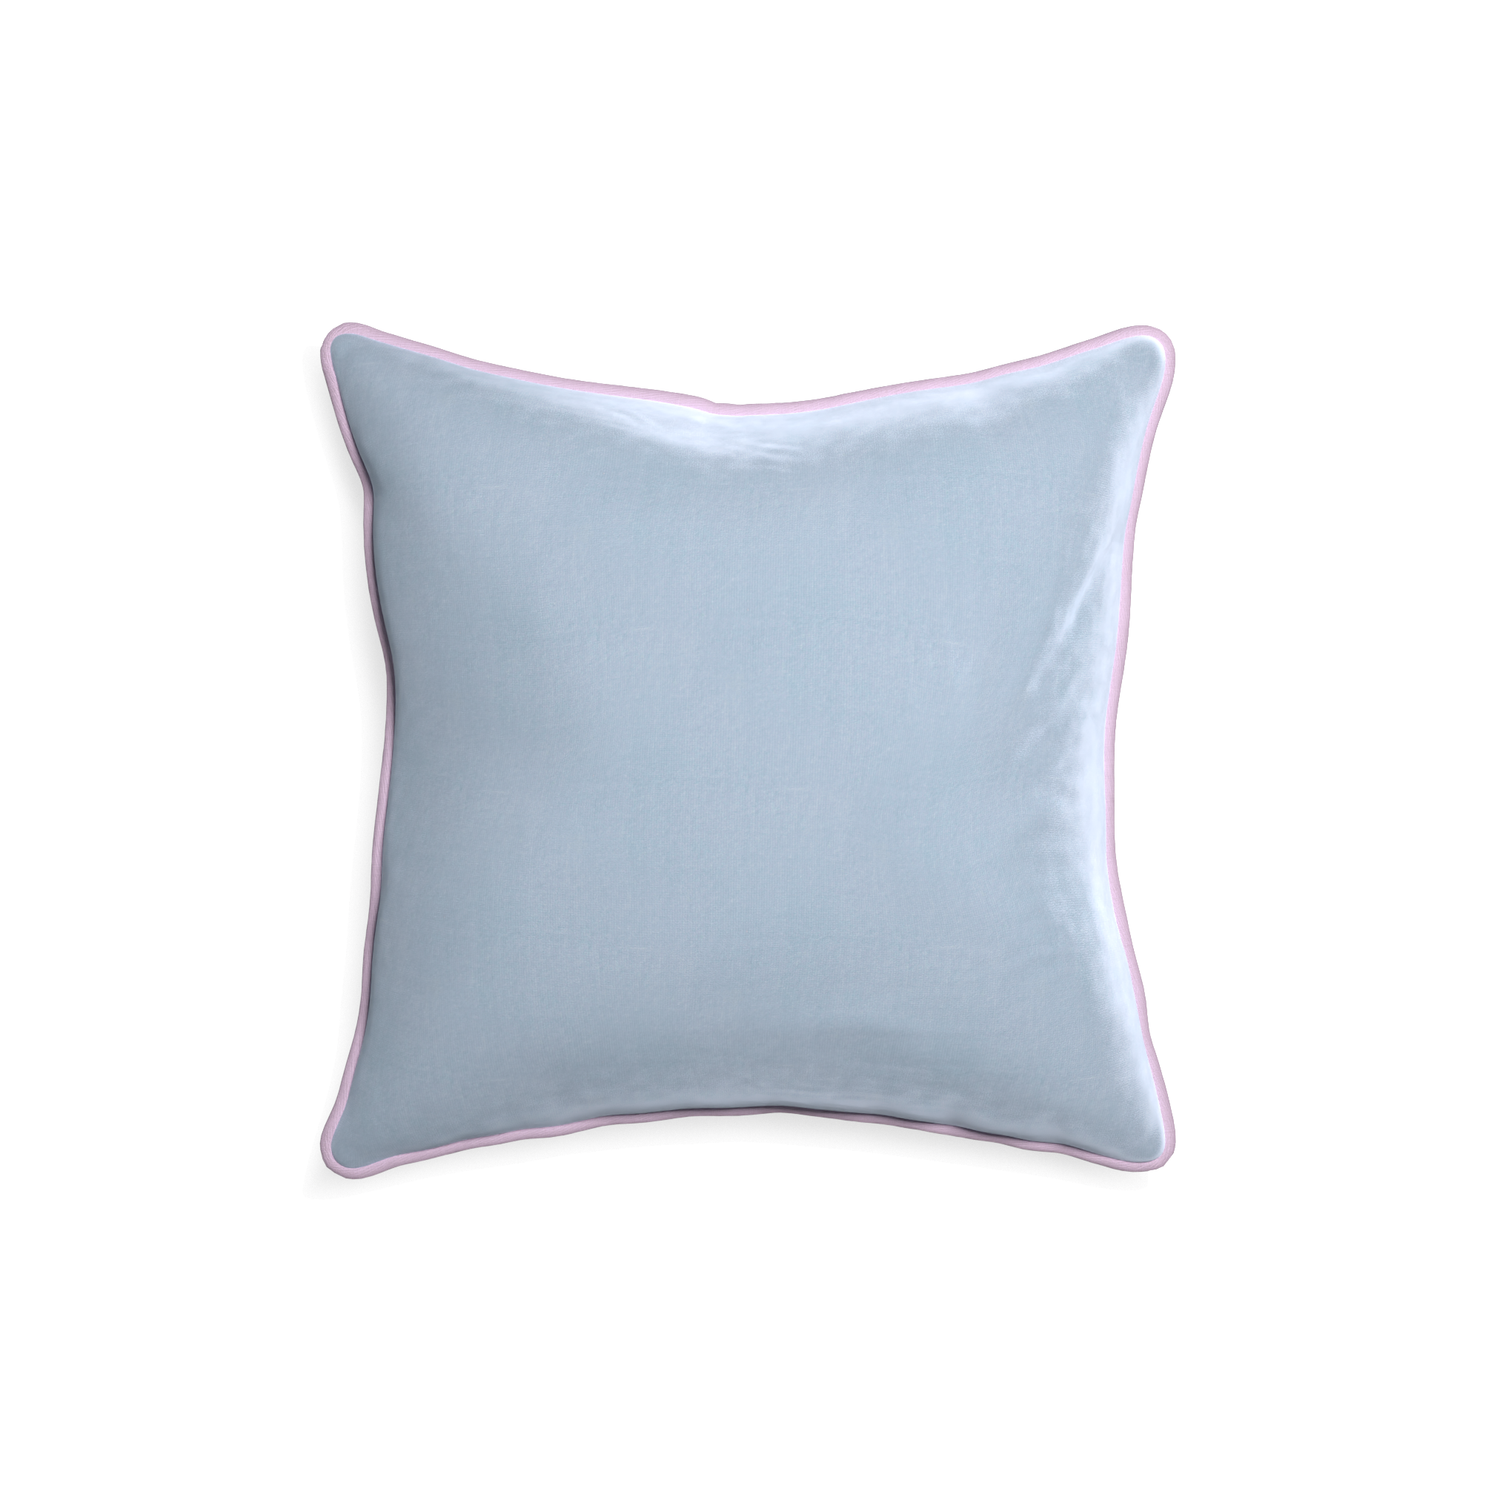 square light blue velvet pillow with lilac piping